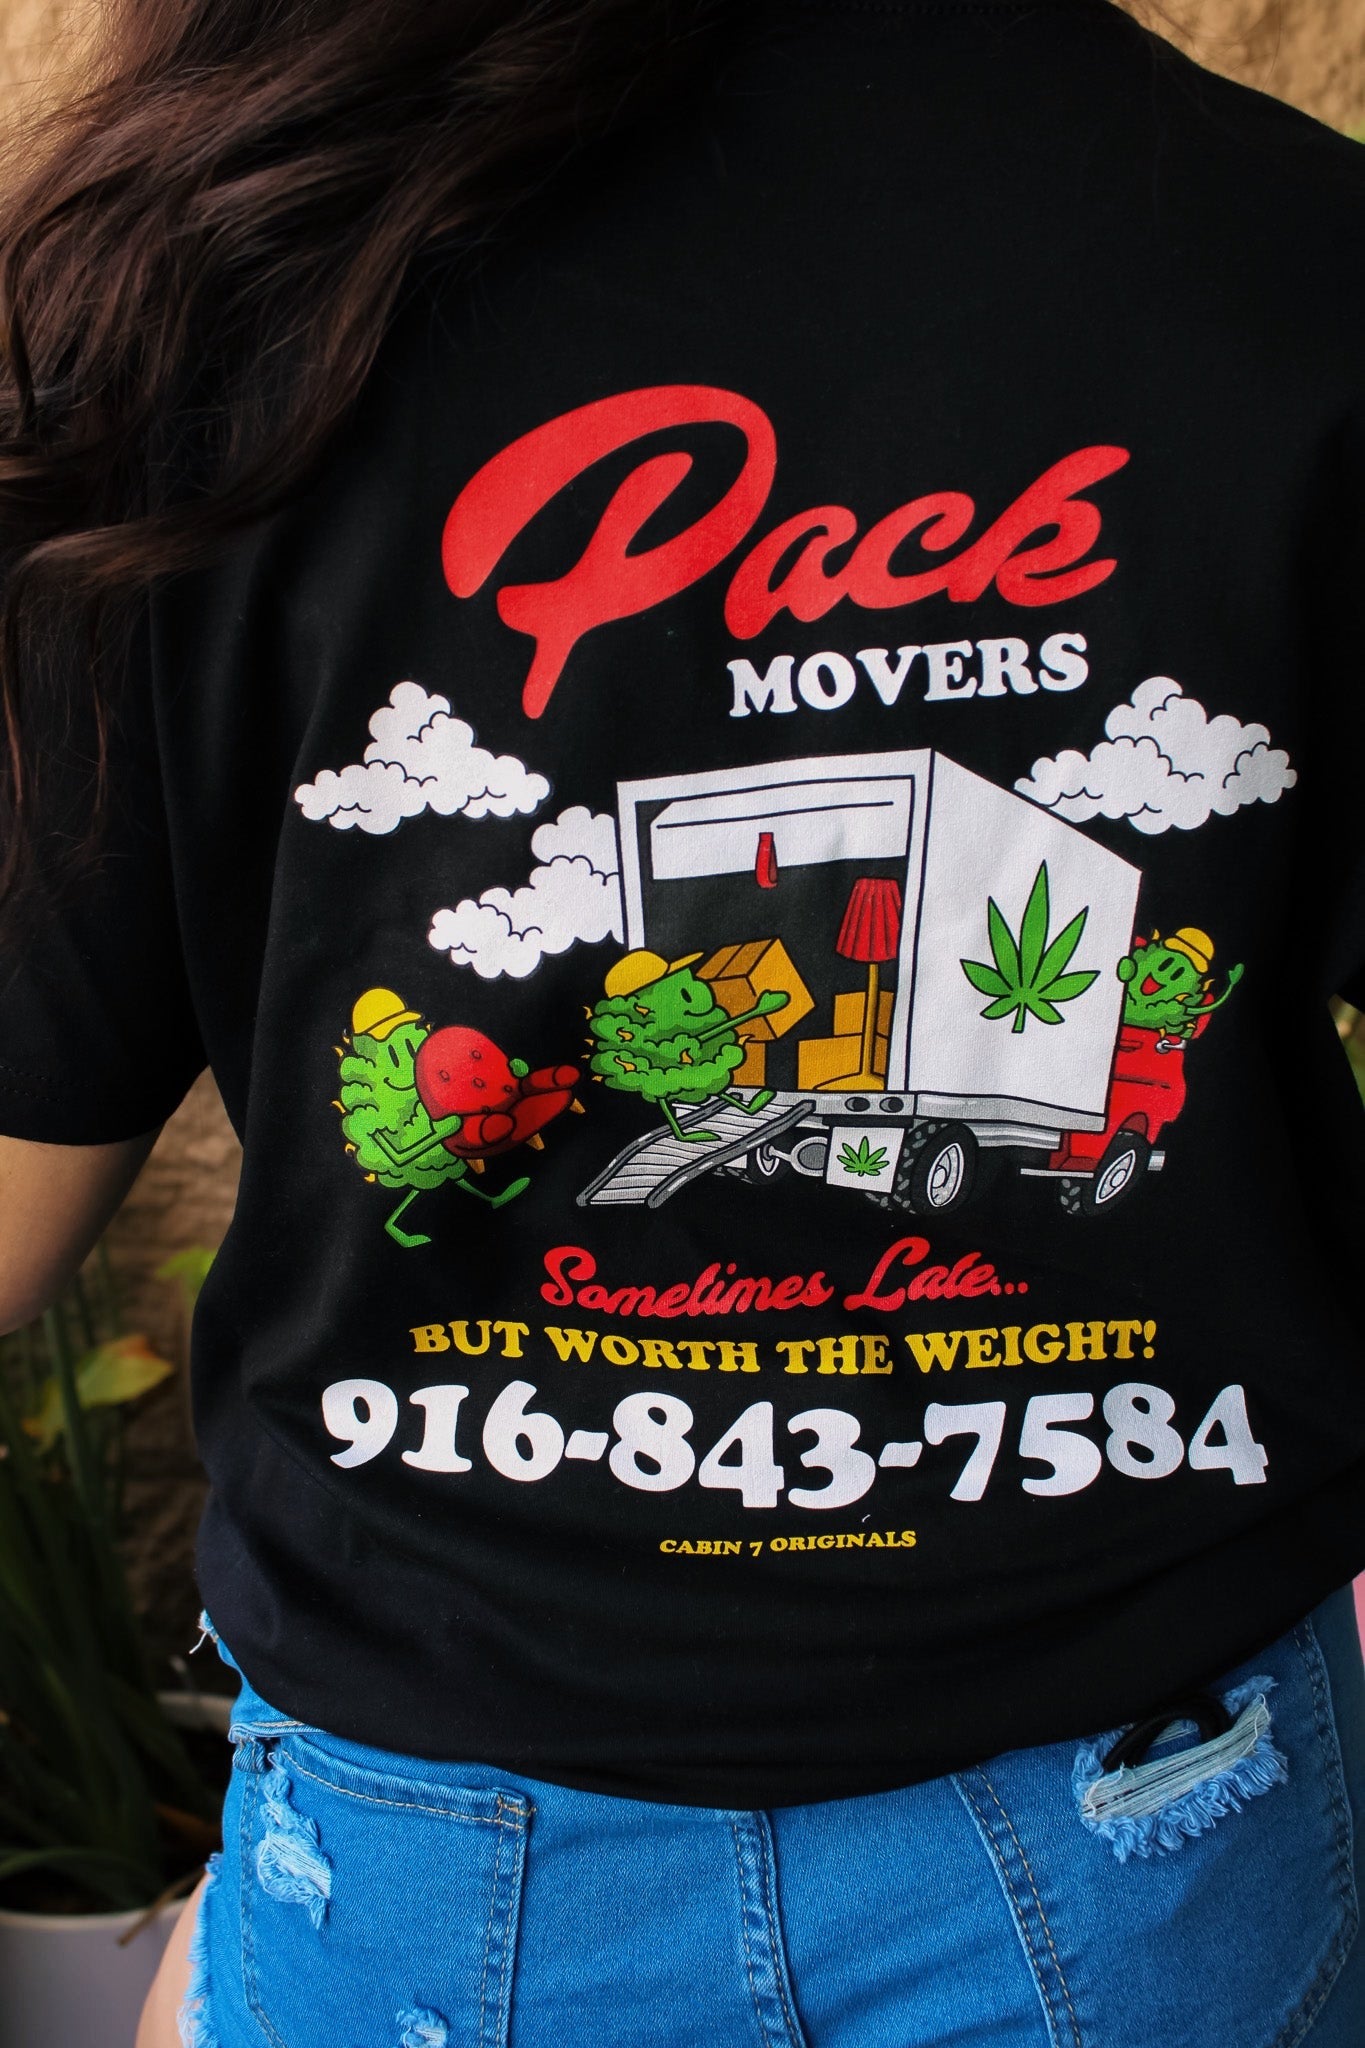 Pack Movers T-Shirt